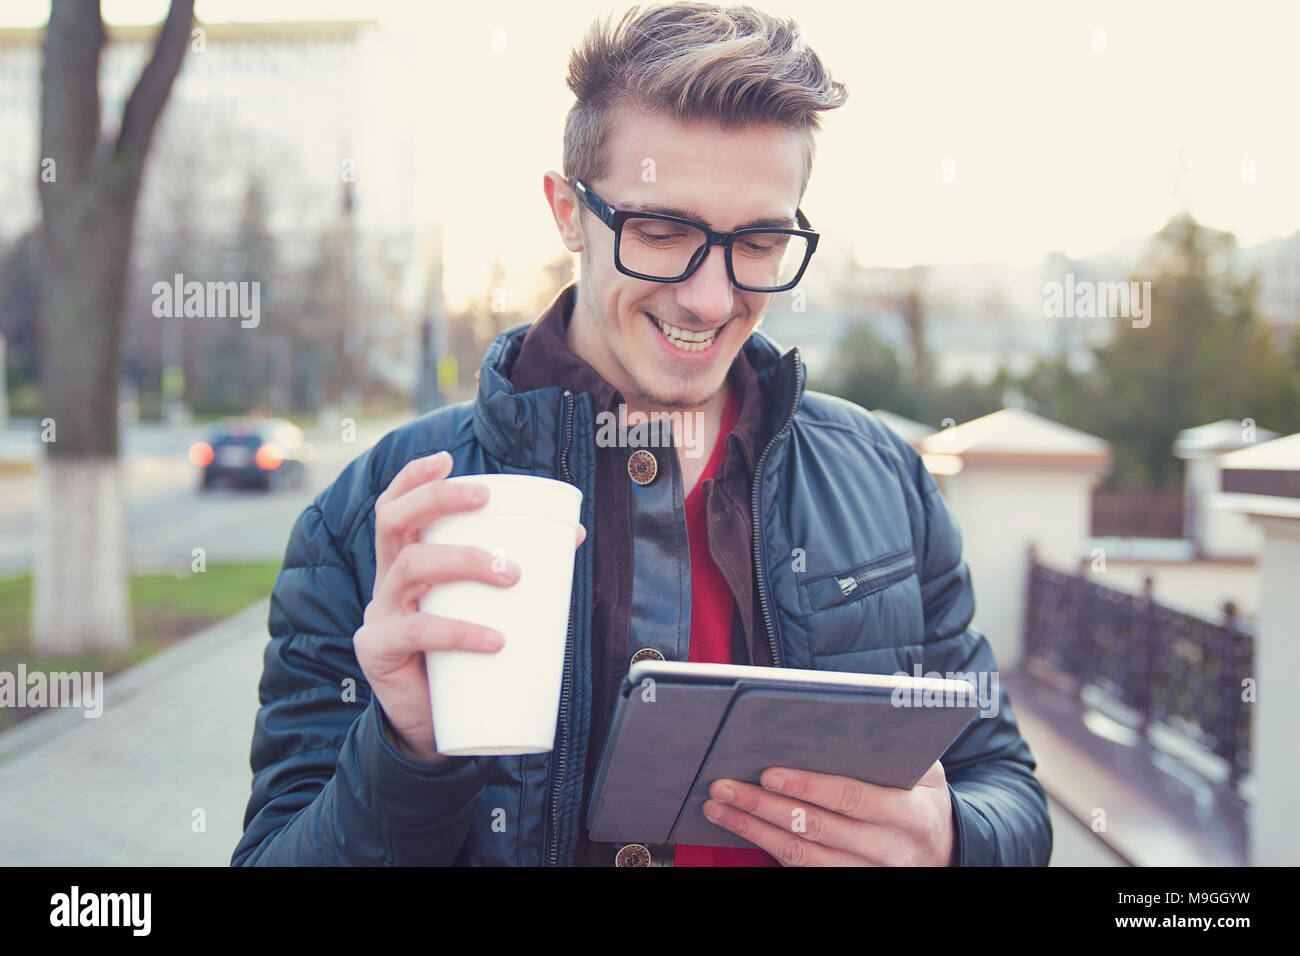 Young smiling man in outwear and eyeglasses using tablet and drinking coffee on street. Stock Photo